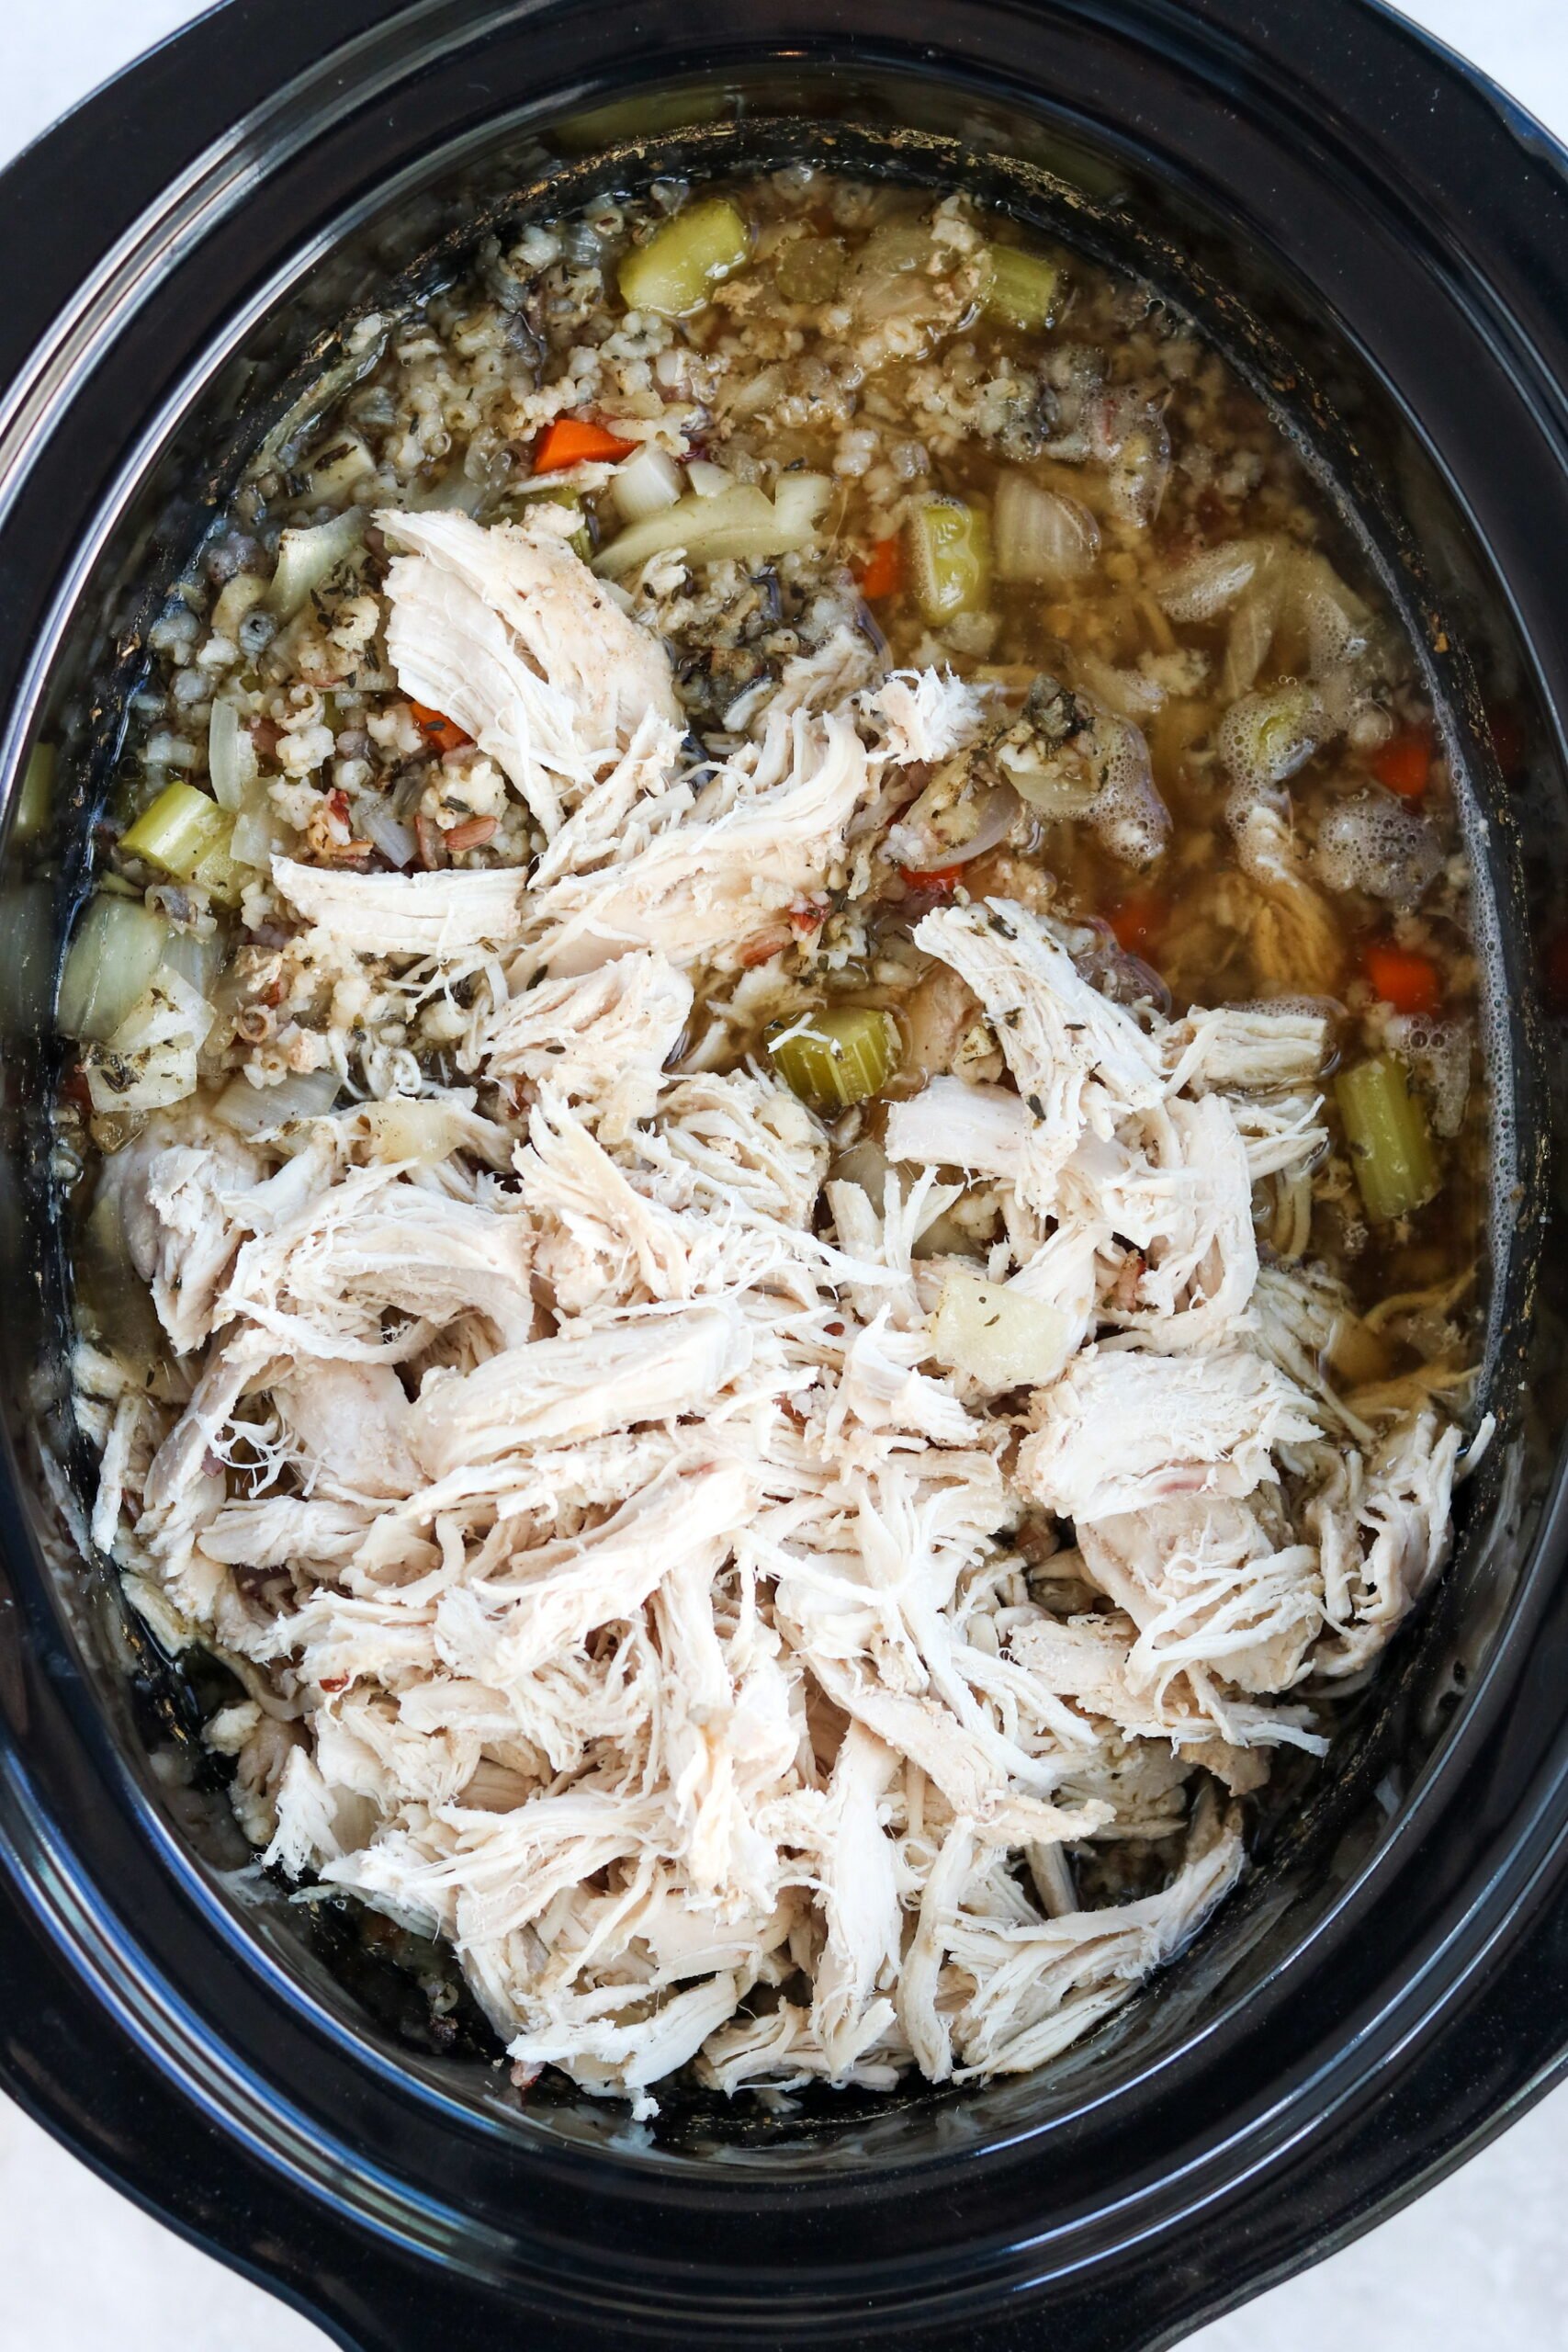 Shredded chicken on top of broth and vegetables in the slow cooker